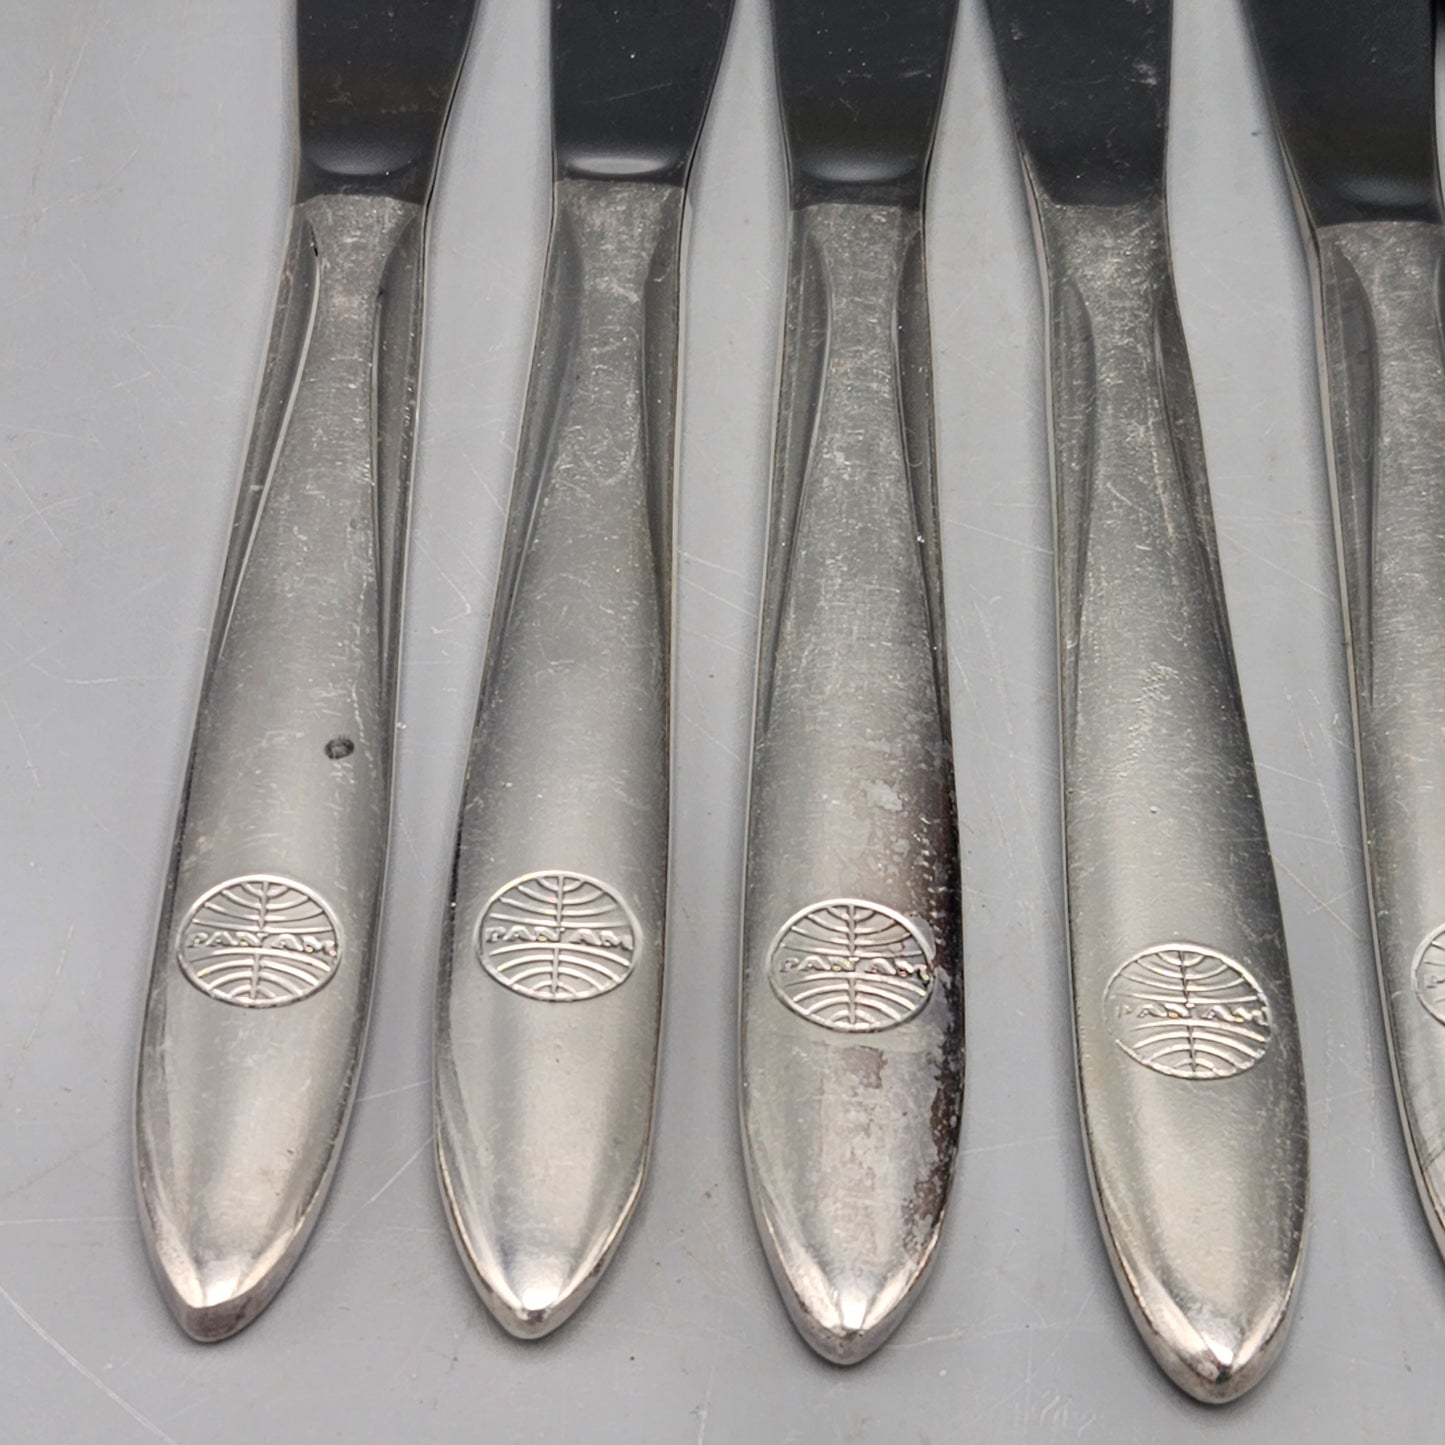 Pan Am Airlines Silverplate Butter Knives - Set of Ten